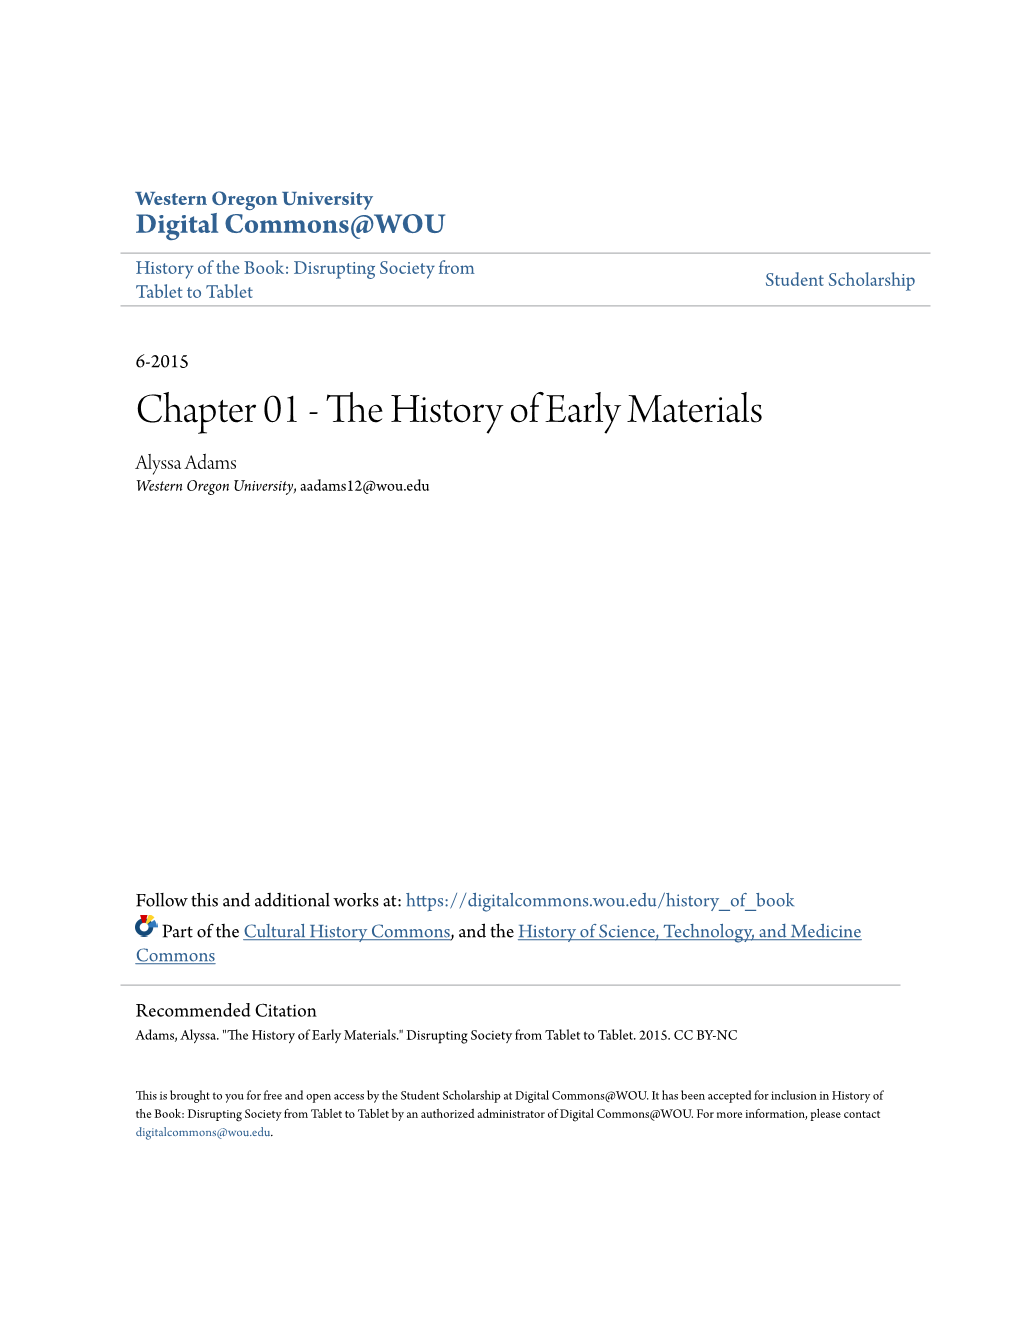 The History of Early Materials